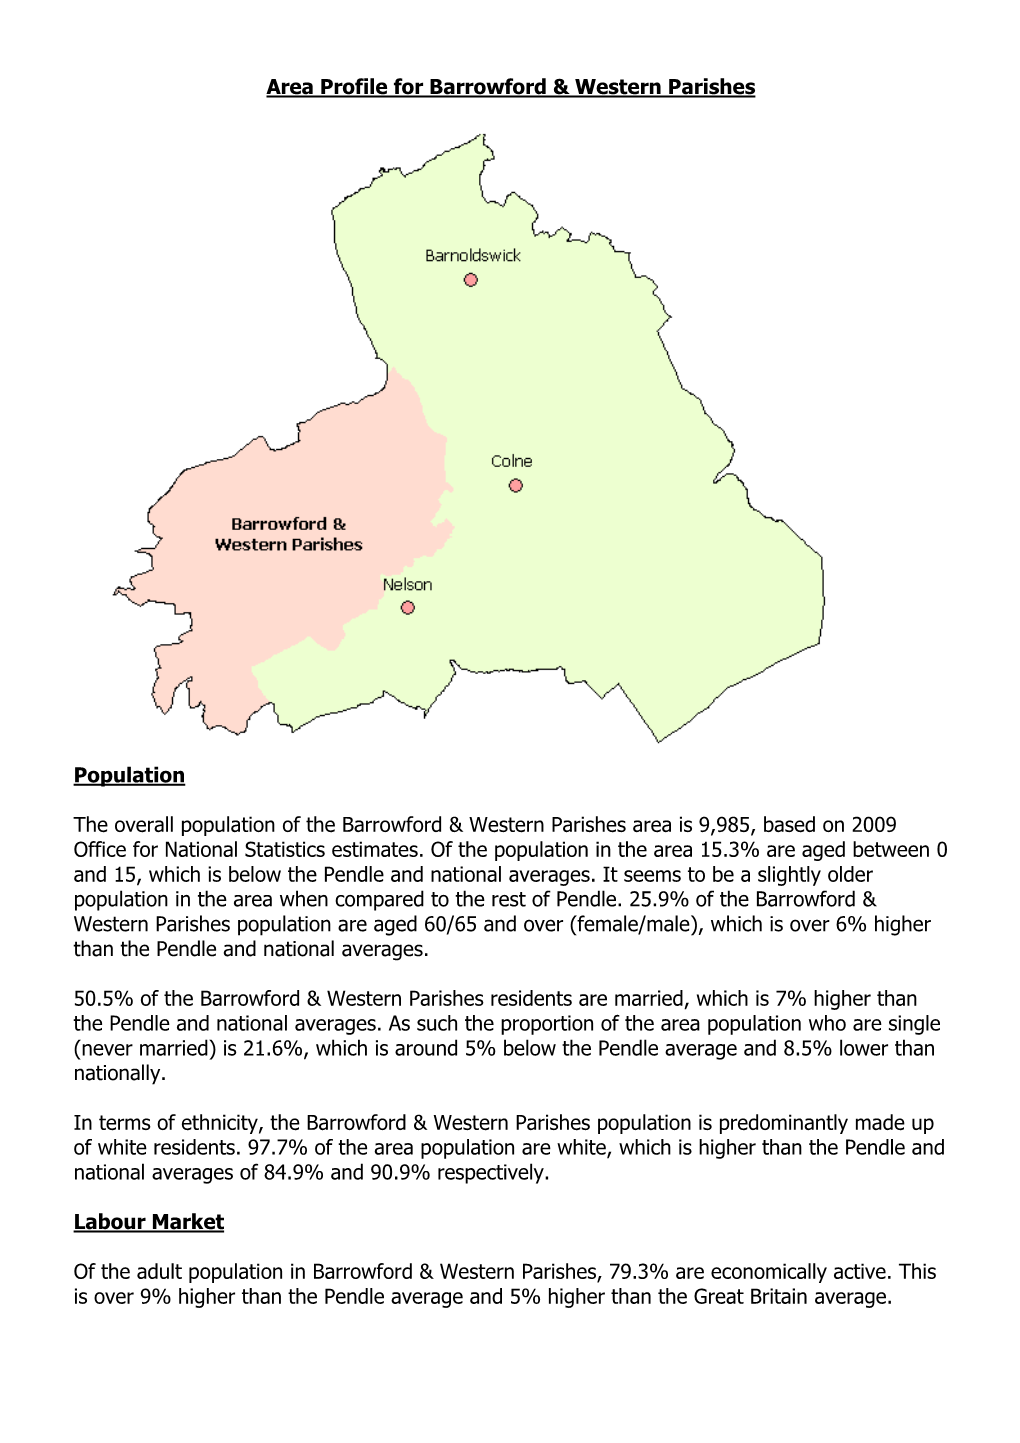 Download Area Profile for Barrowford and Western Parishes